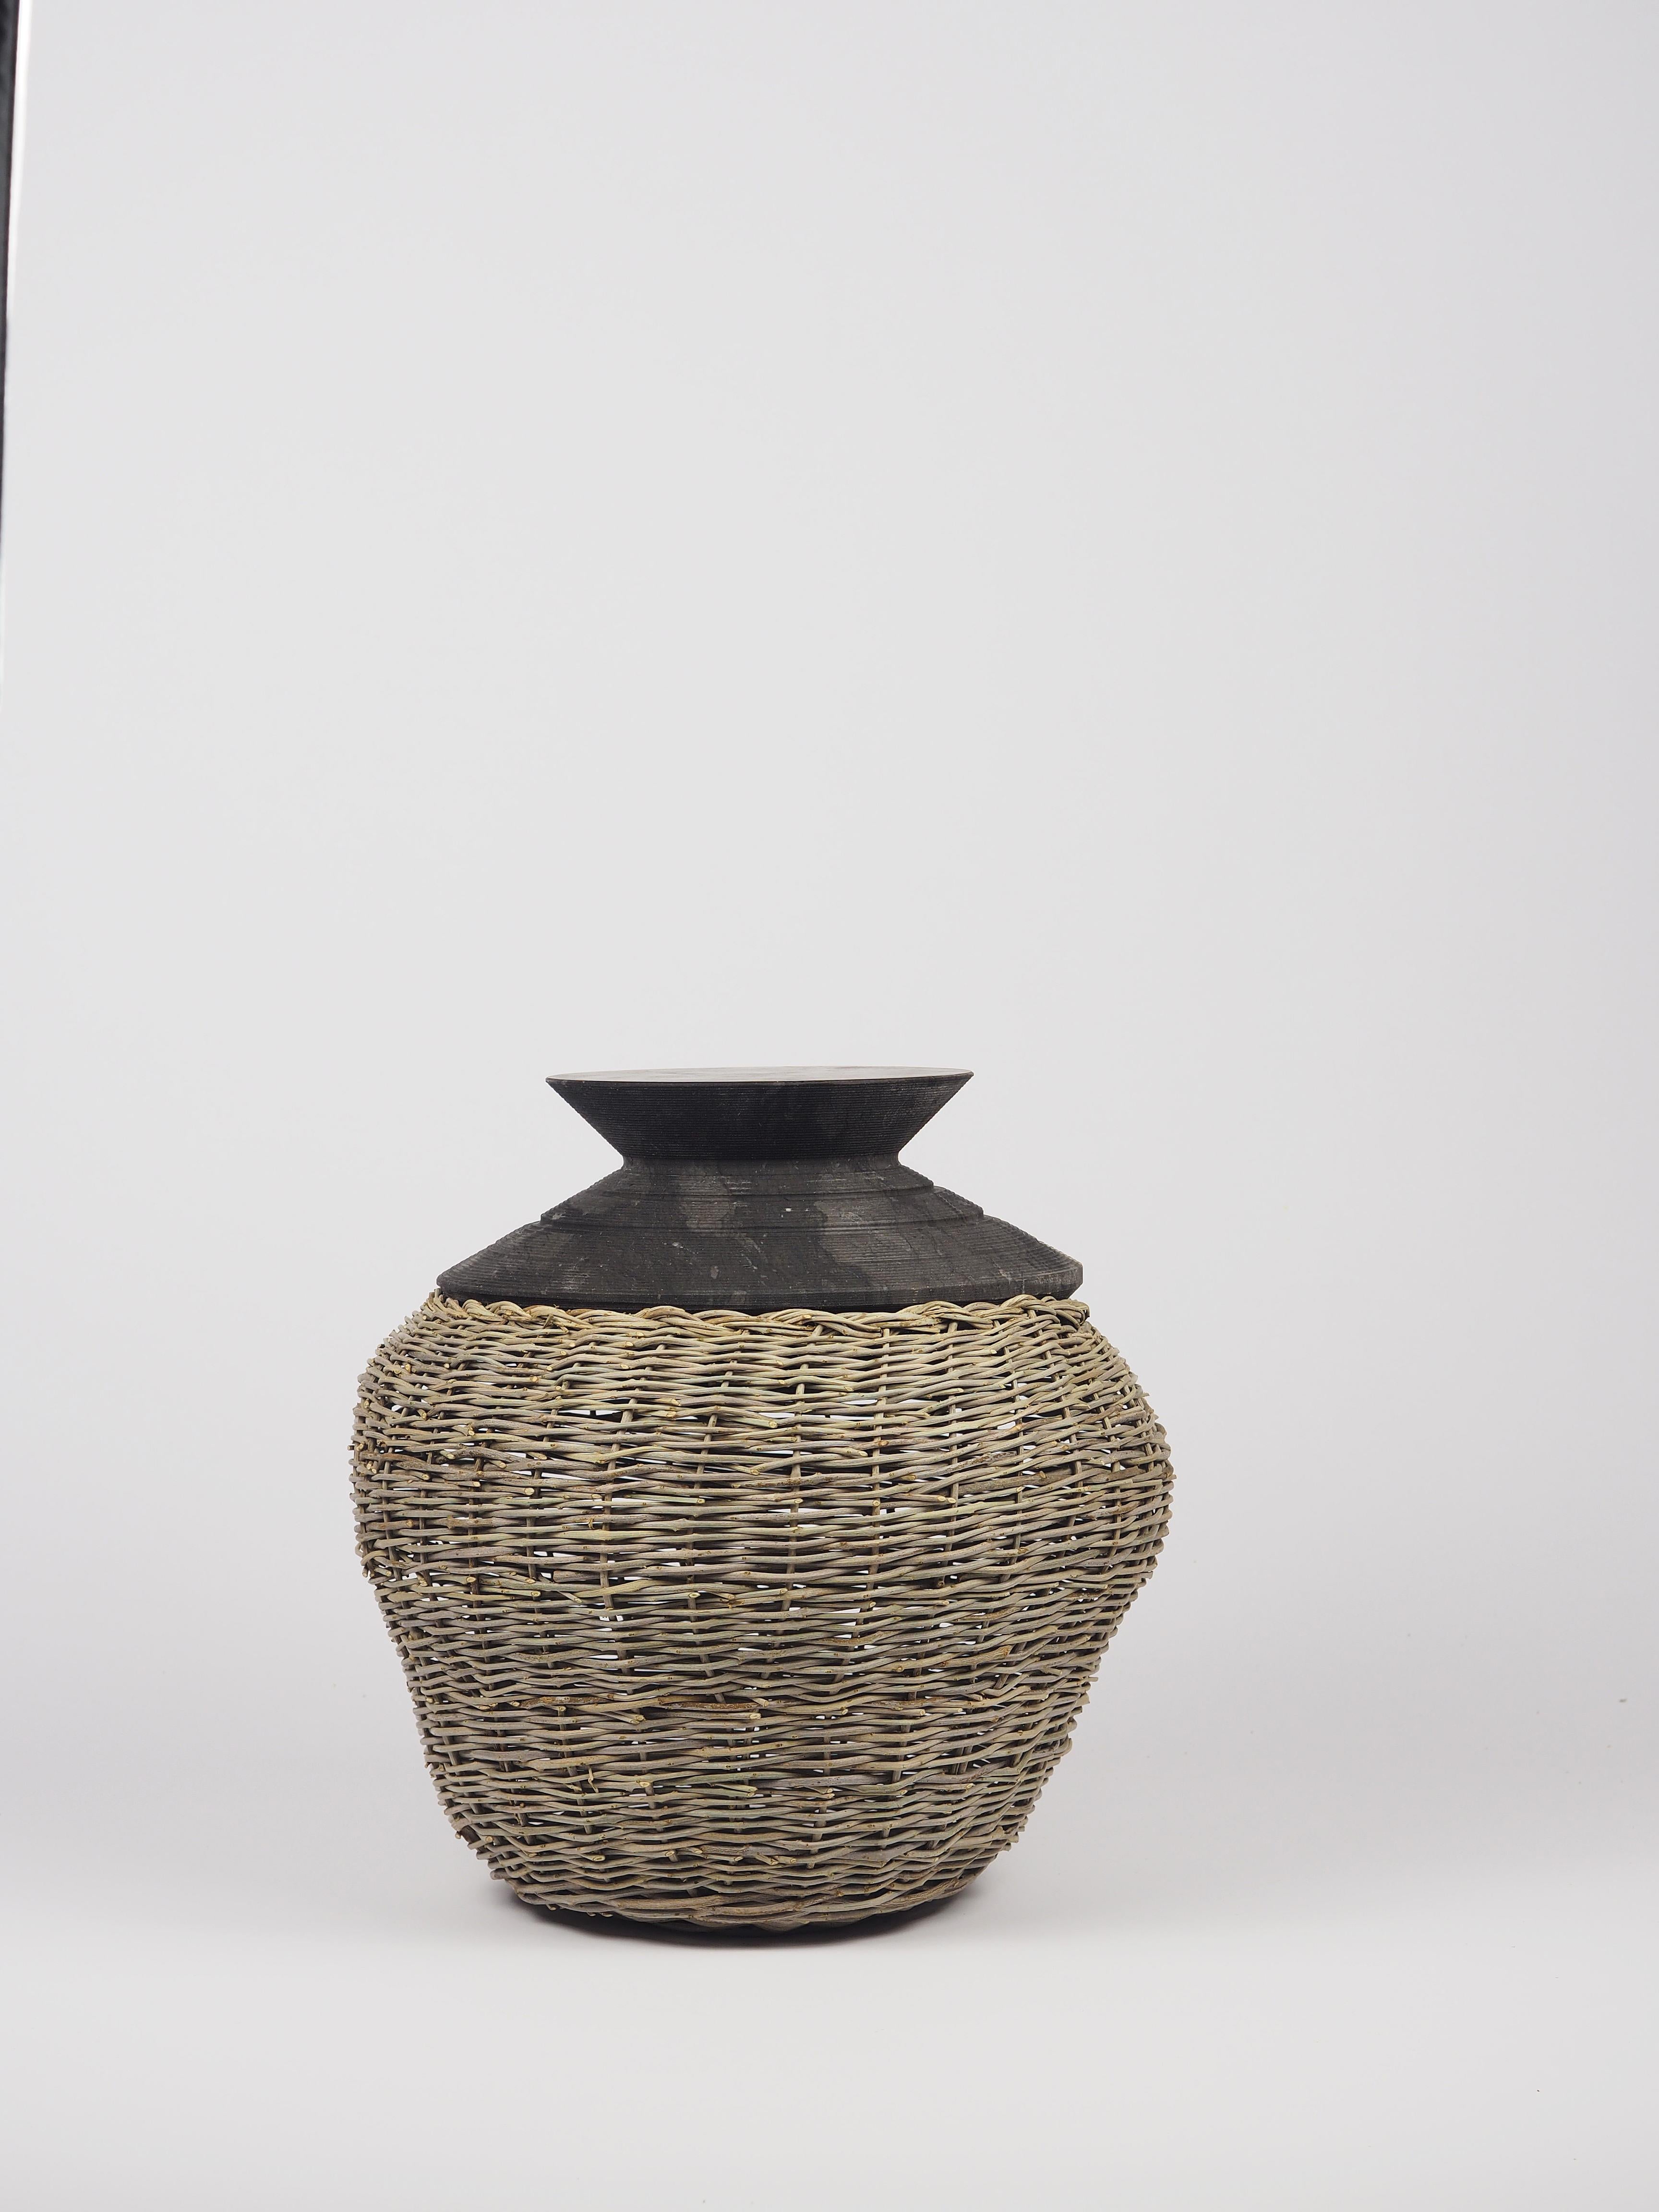 A collection of centerpieces and containers in Jerissa stone and intertwined olive branches that reflect the theme of the traditional basket, reinterpreted; recovered from a distant past, they are reviewed in a contemporary key, stylized, reworked